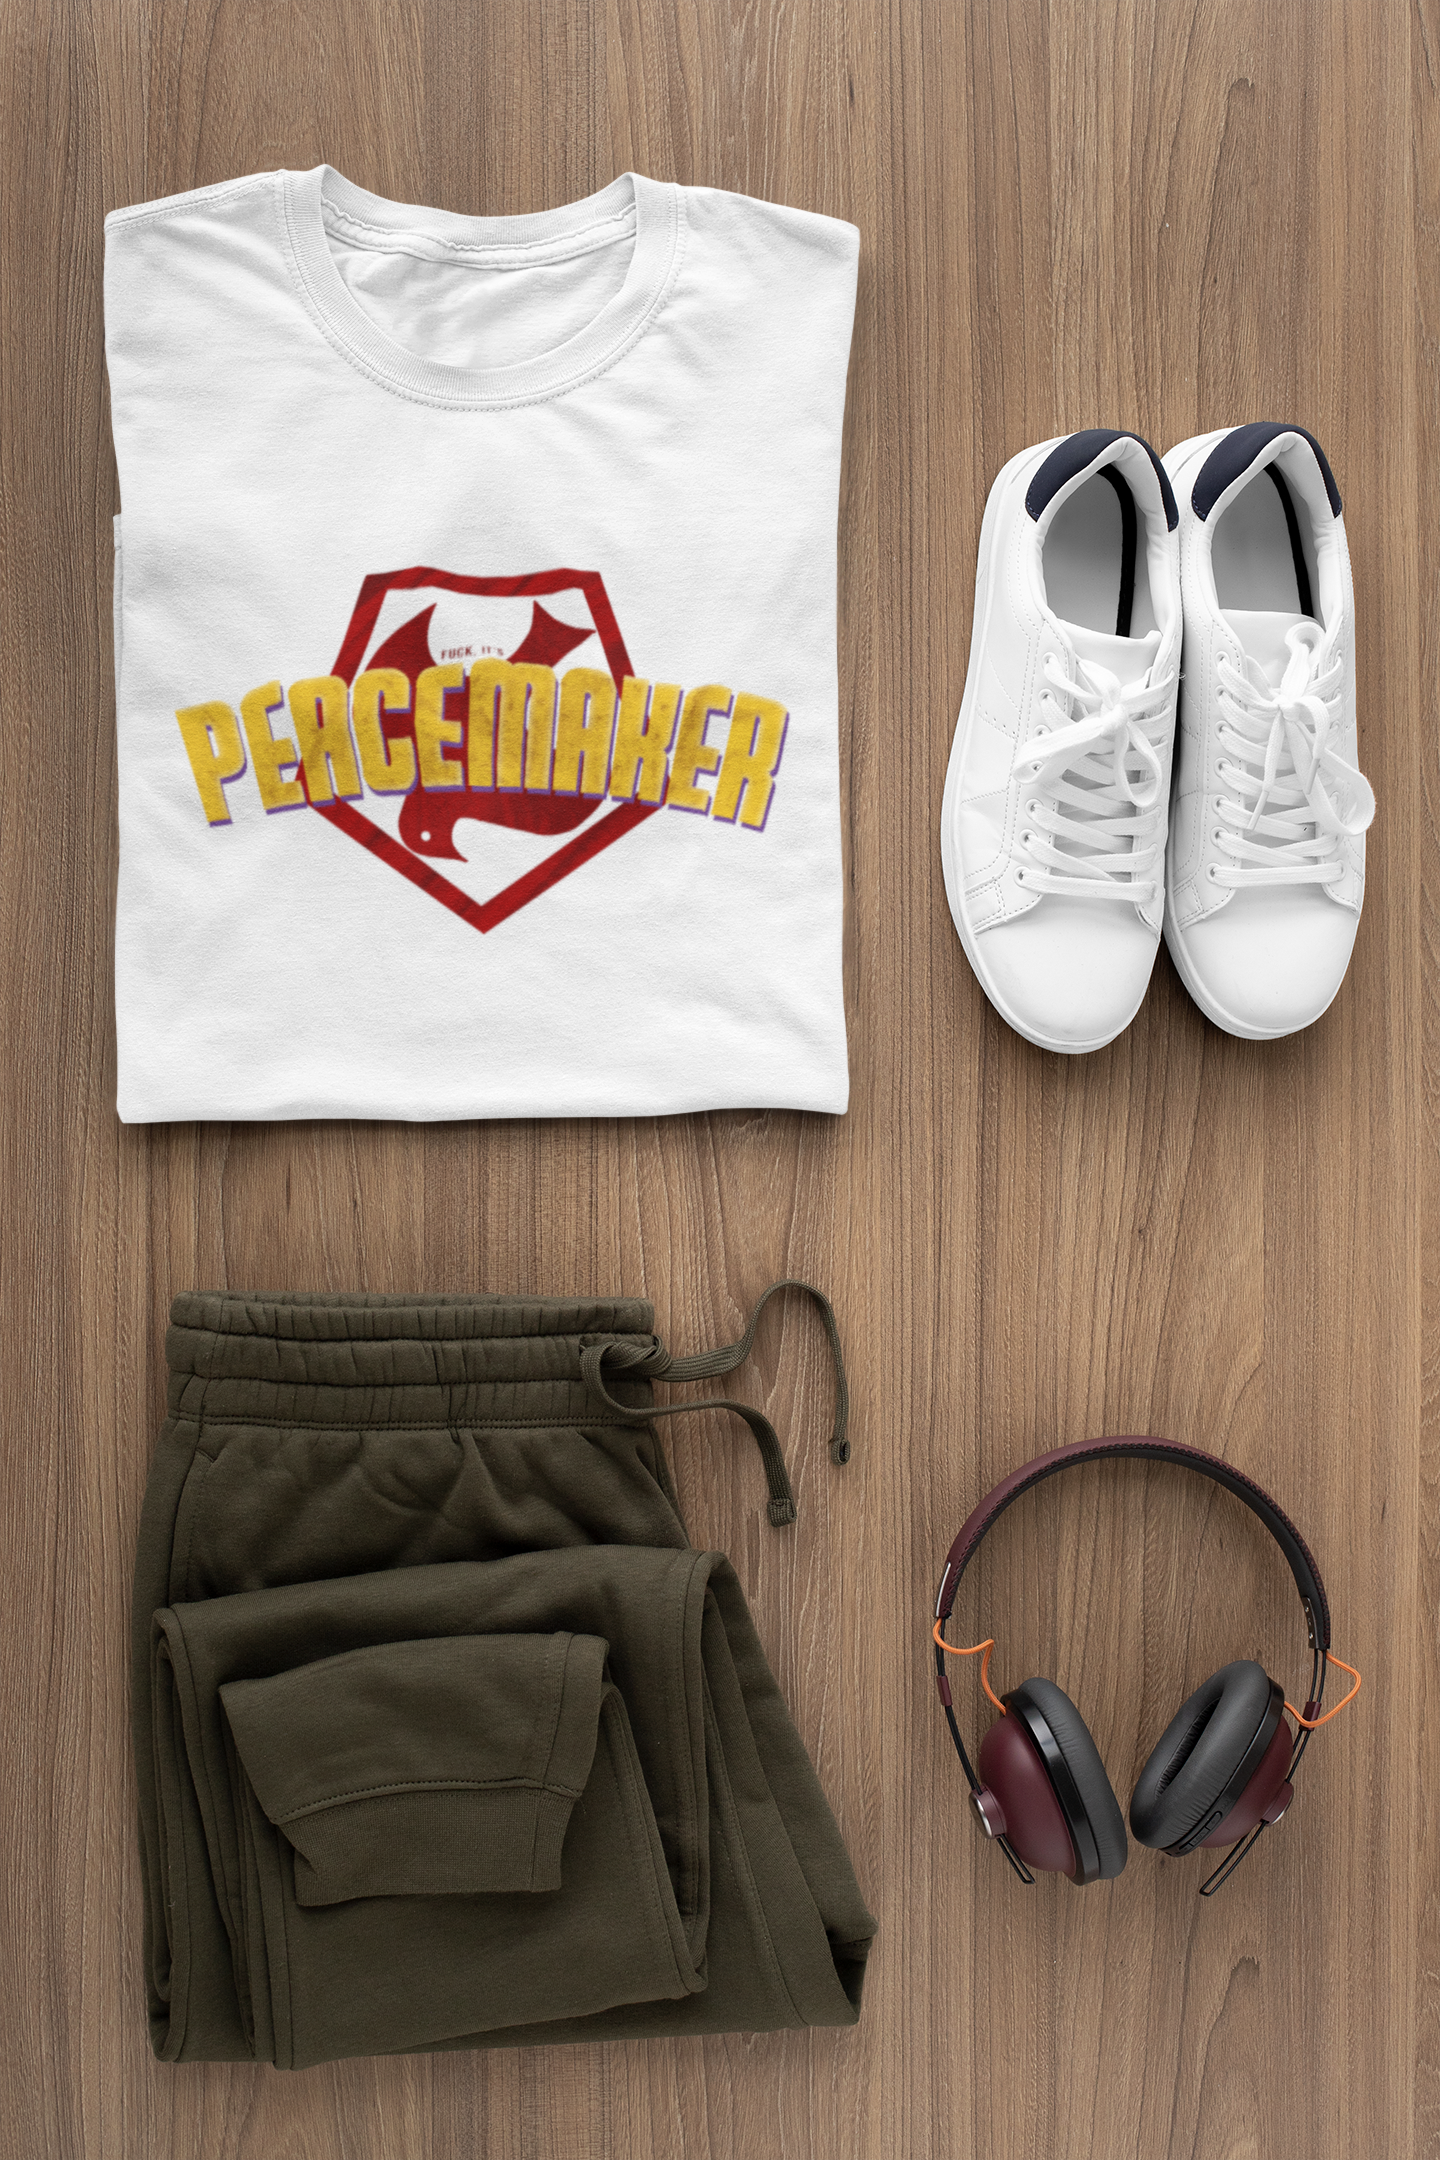 Fuck. It's Peacemaker Super Hero Fun Mens and Womens Graphic T Shirt